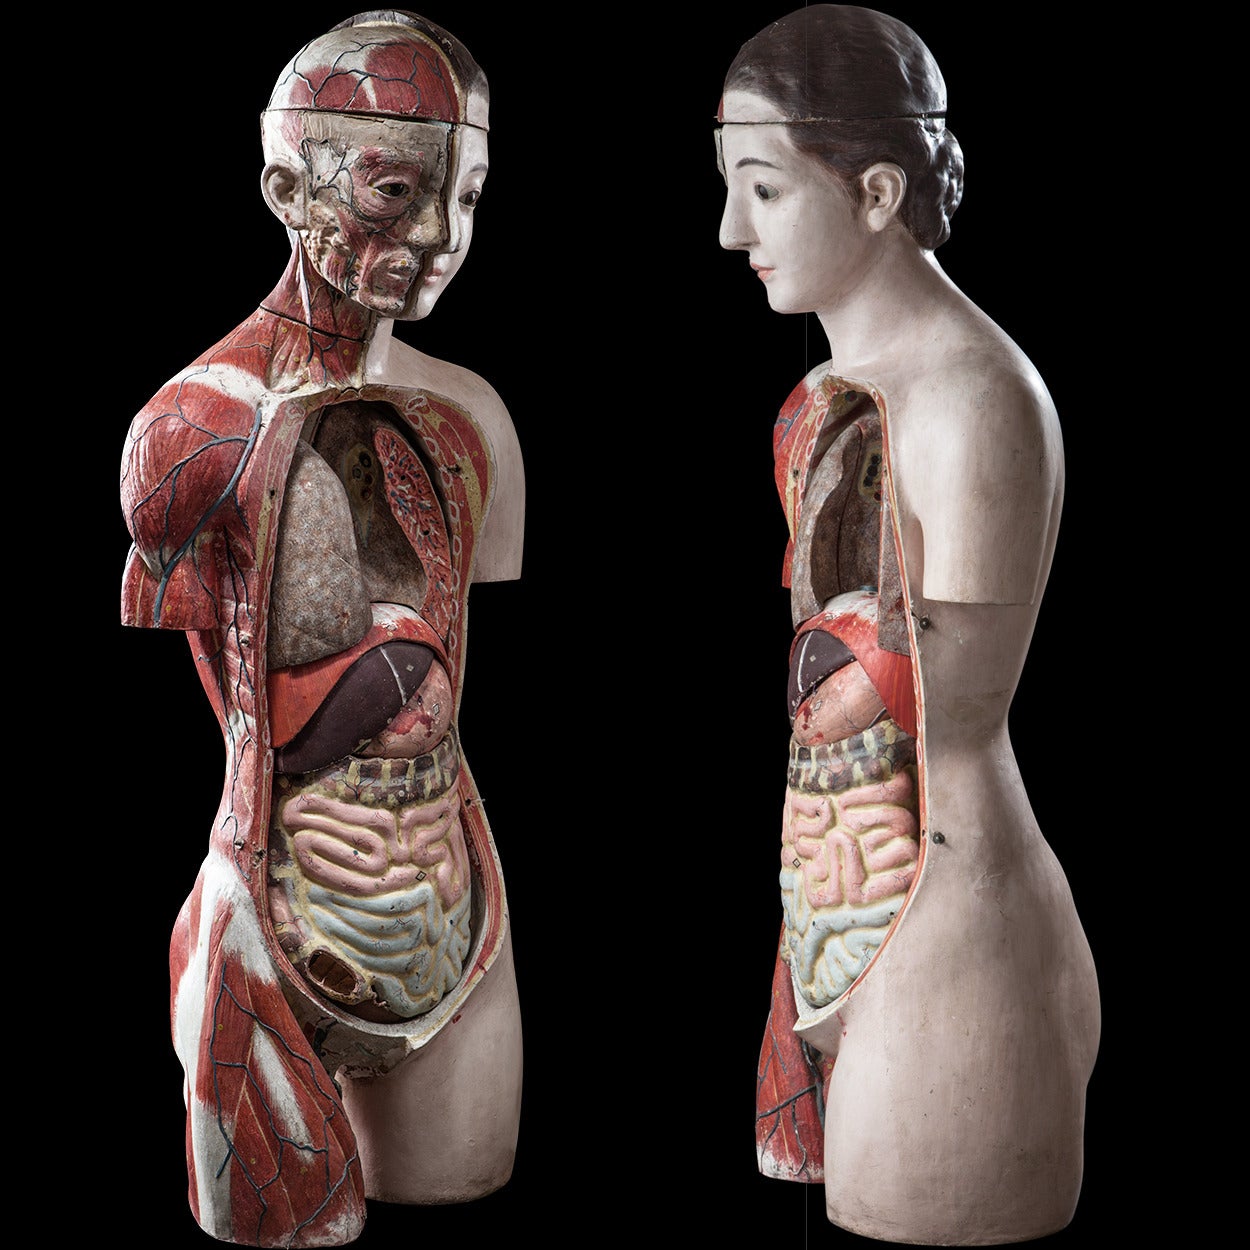 Wonderful classroom model demonstrating the female anatomy. 

Made in occupied Japan, circa 1950.